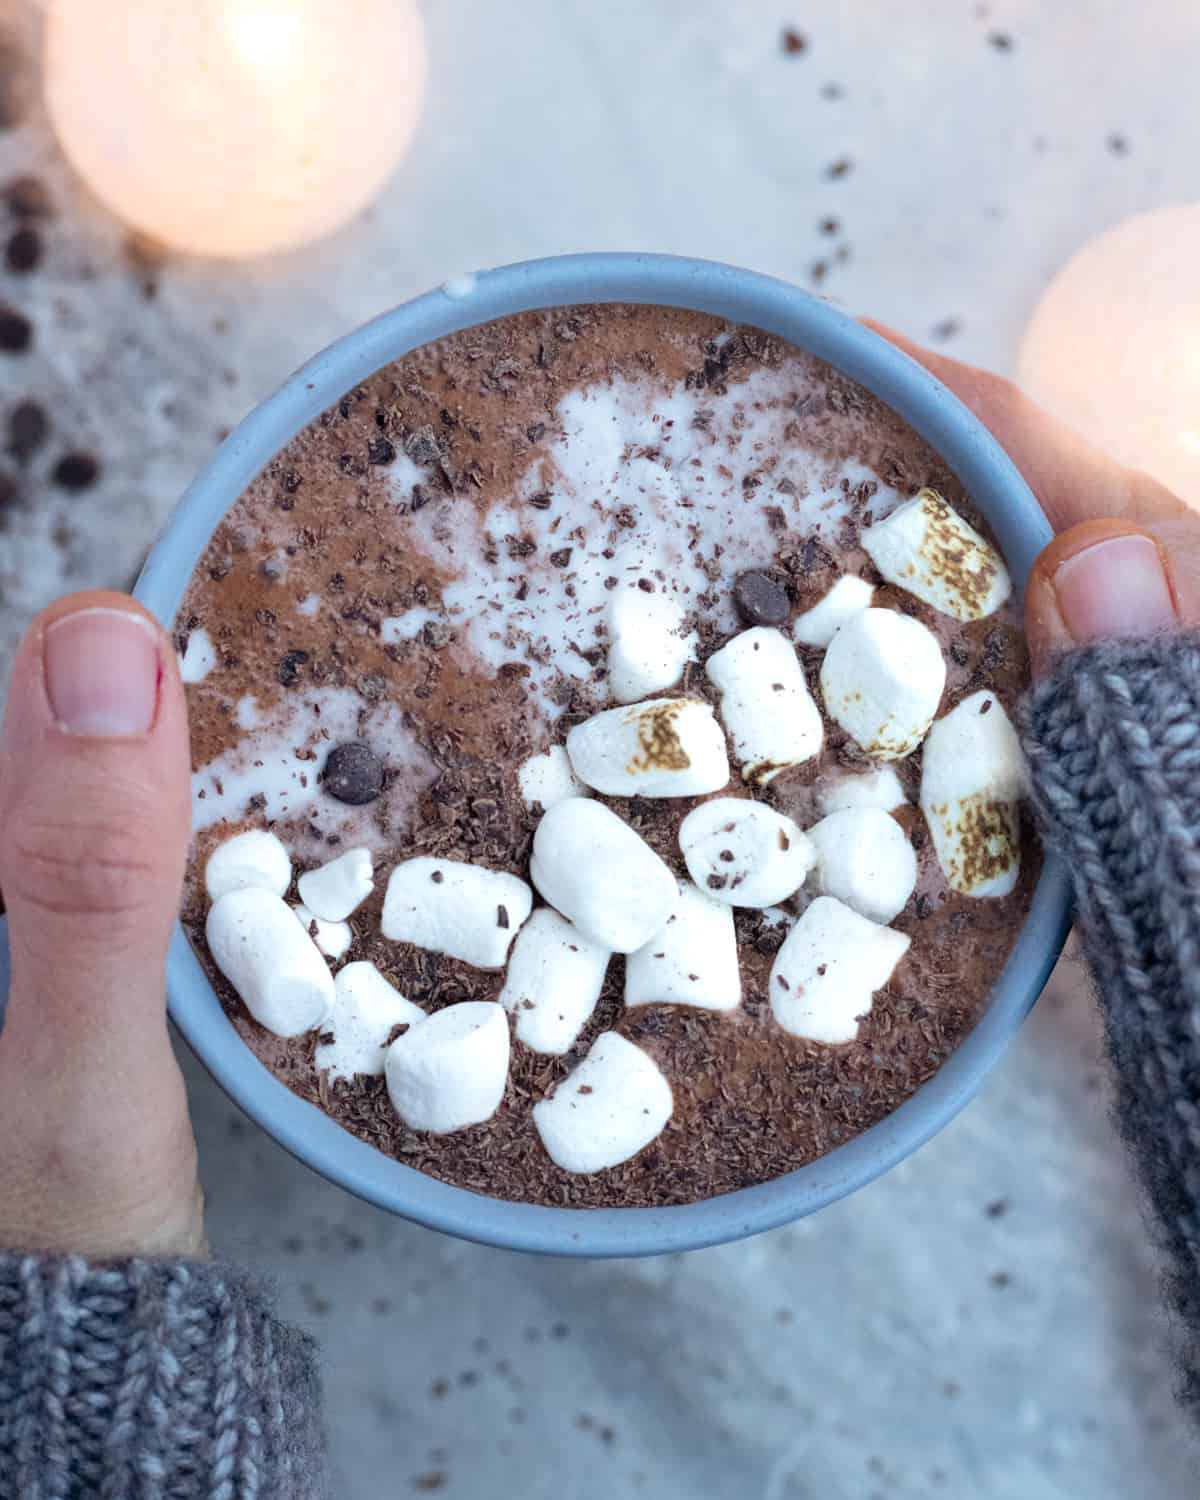 A cozy scene with hands wrapped in a knitted grey sweater holding a bowl of protein hot chocolate topped with marshmallows and a sprinkle of chocolate shavings, with soft glowing lights in the background.